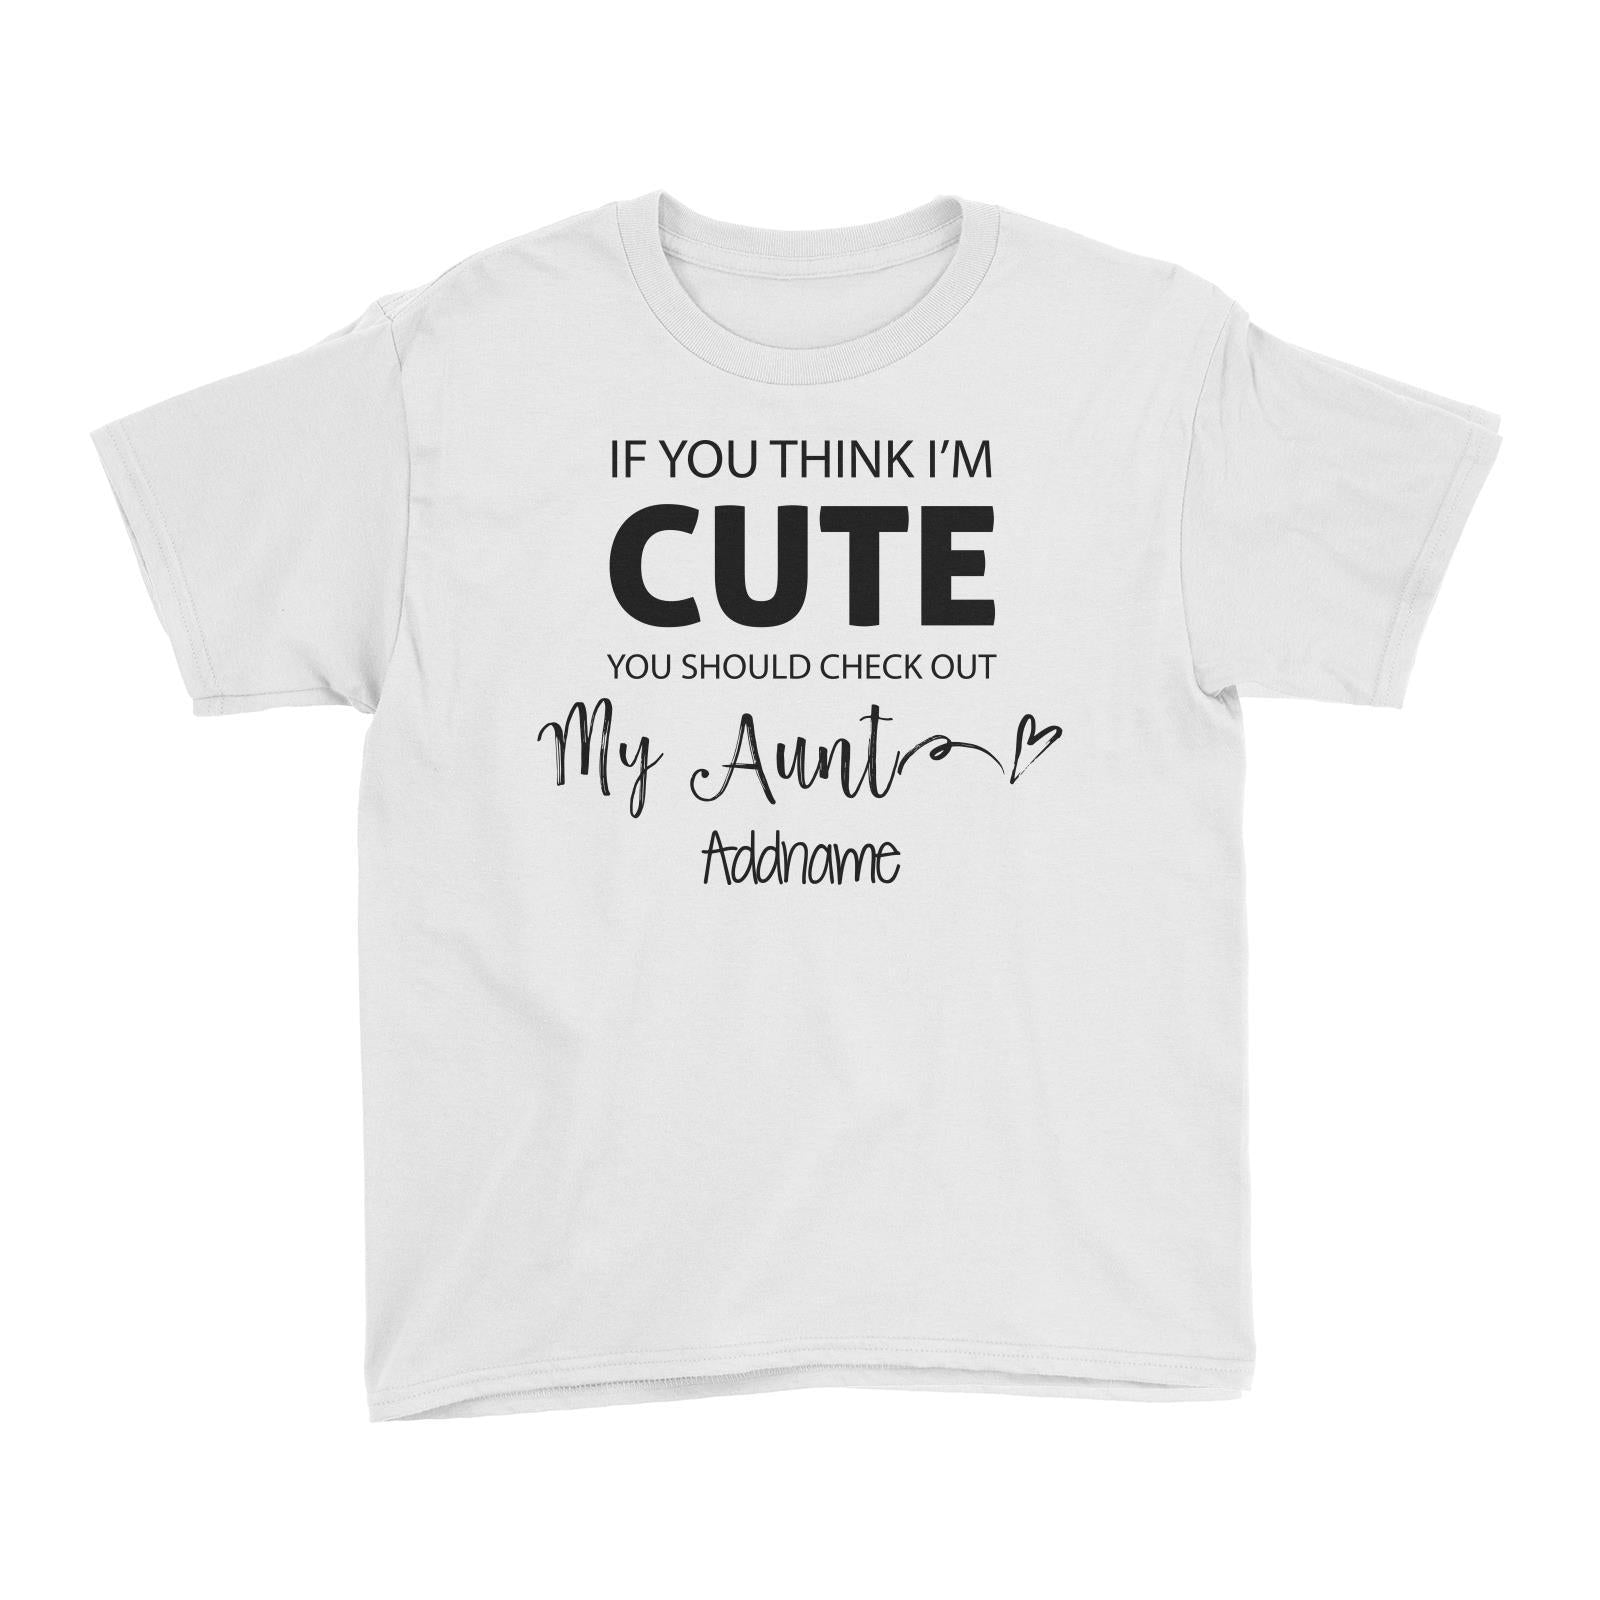 If You Think I'm Cute You Should Check Out My Aunt Addname Kid's T-Shirt